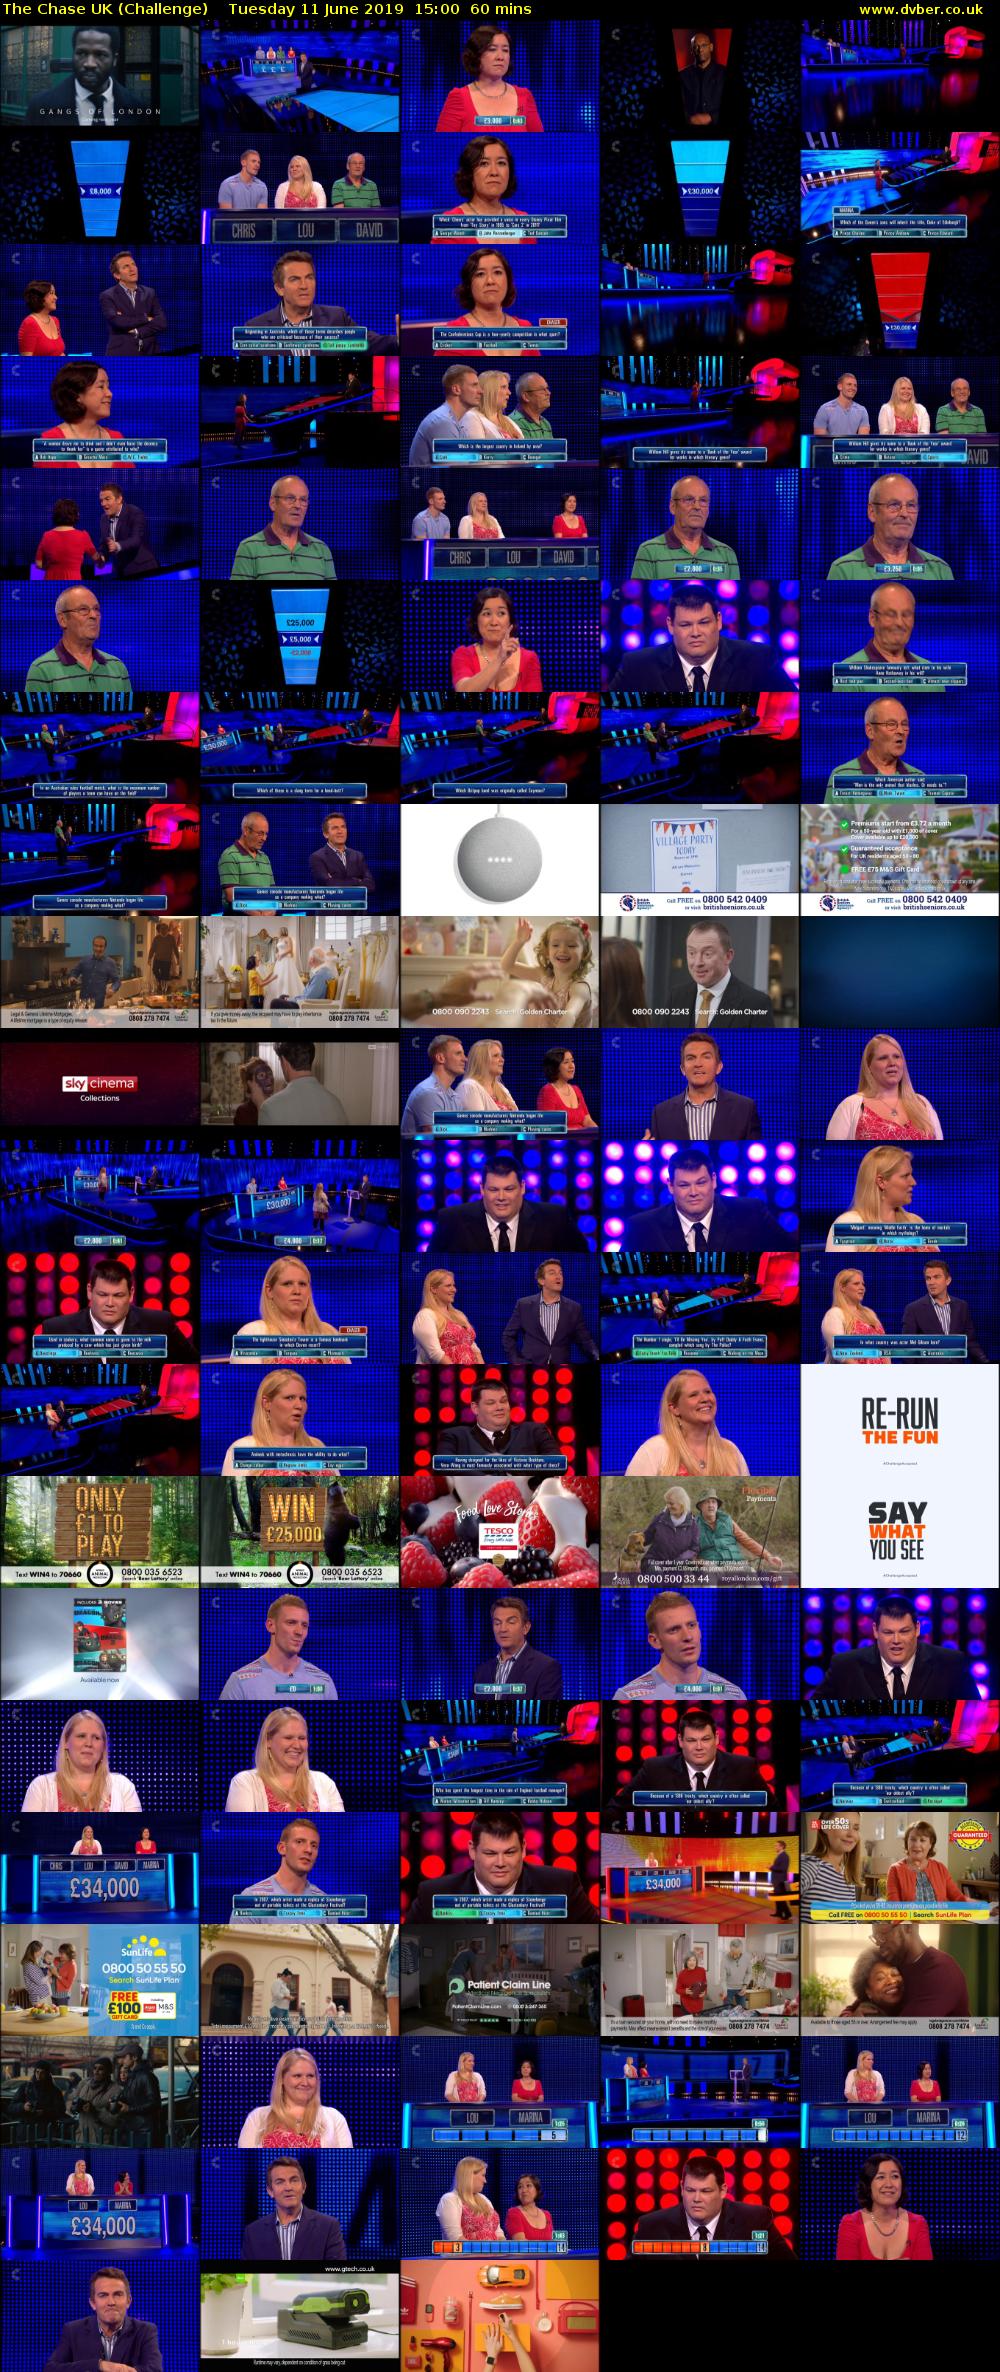 The Chase UK (Challenge) Tuesday 11 June 2019 15:00 - 16:00